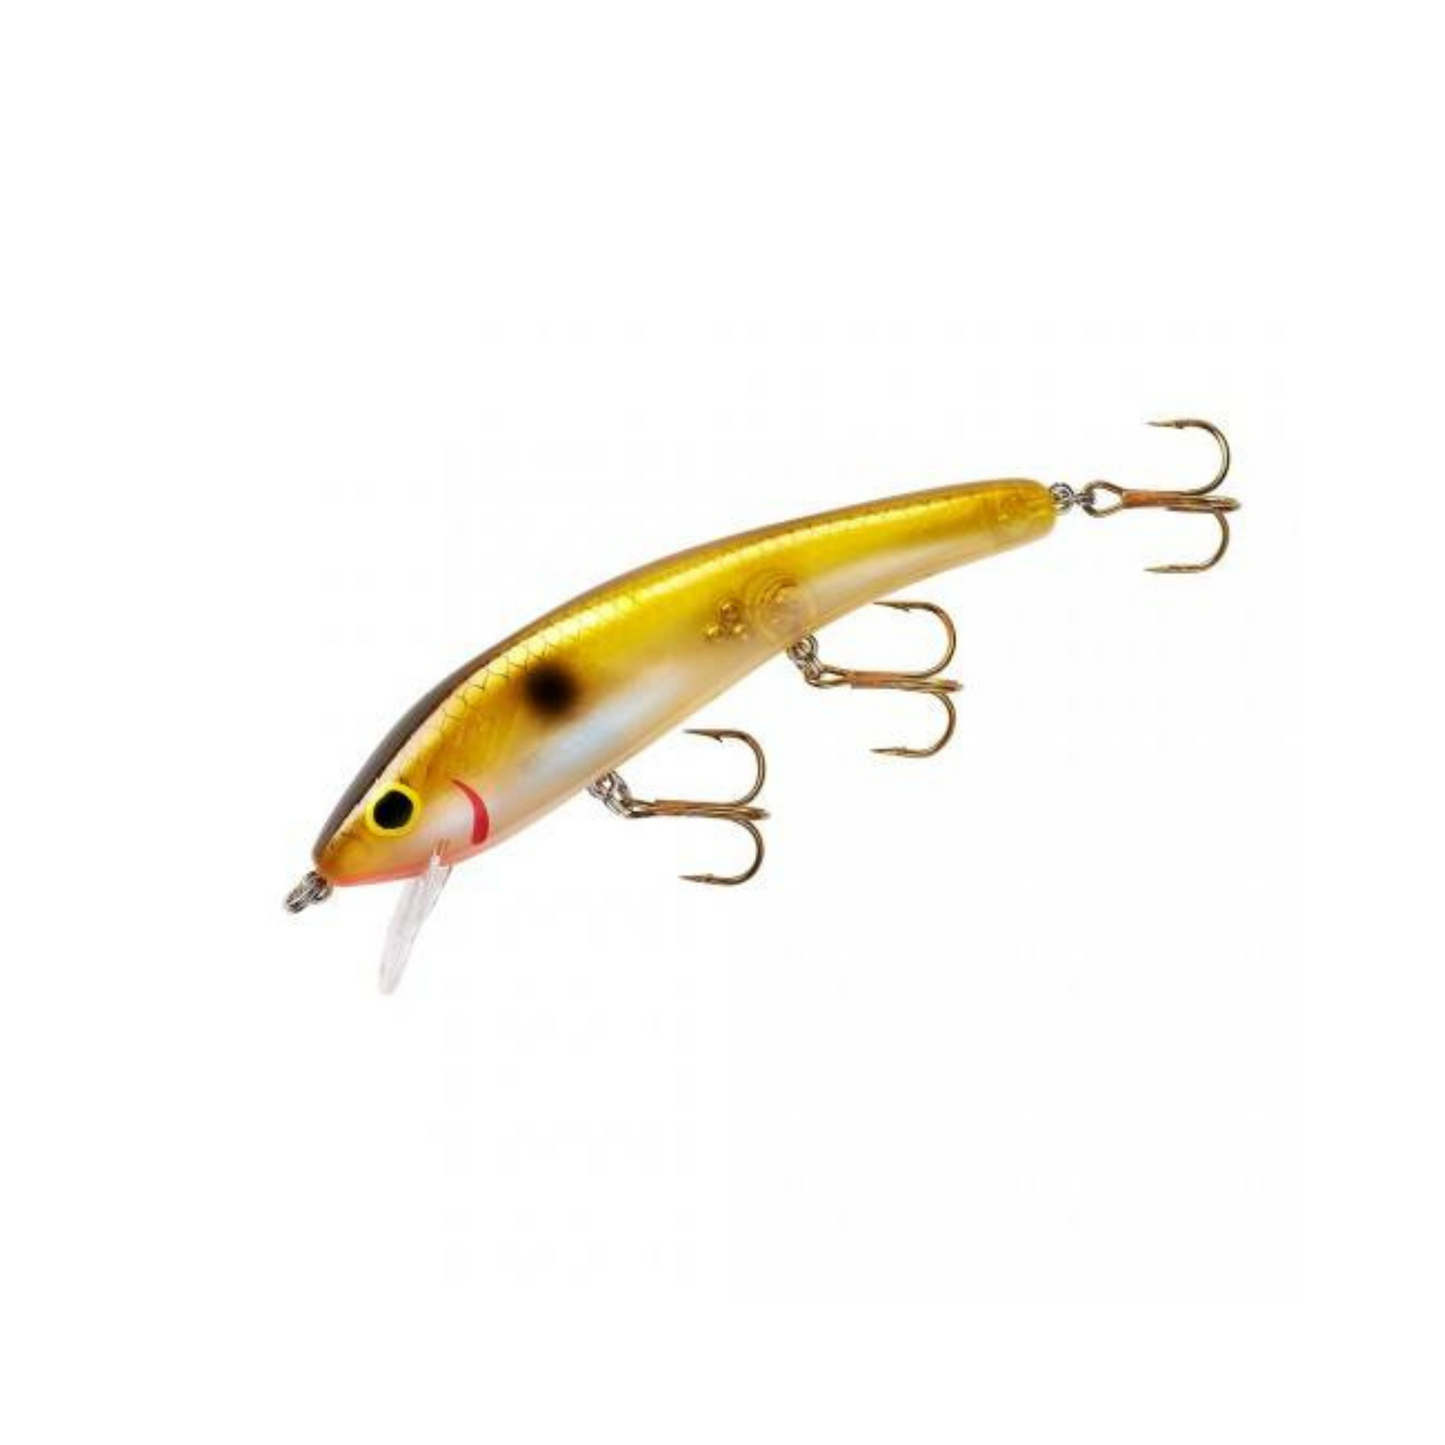 Cotton Cordell Ripplin' Red Fin – Erie & Creek Tackle